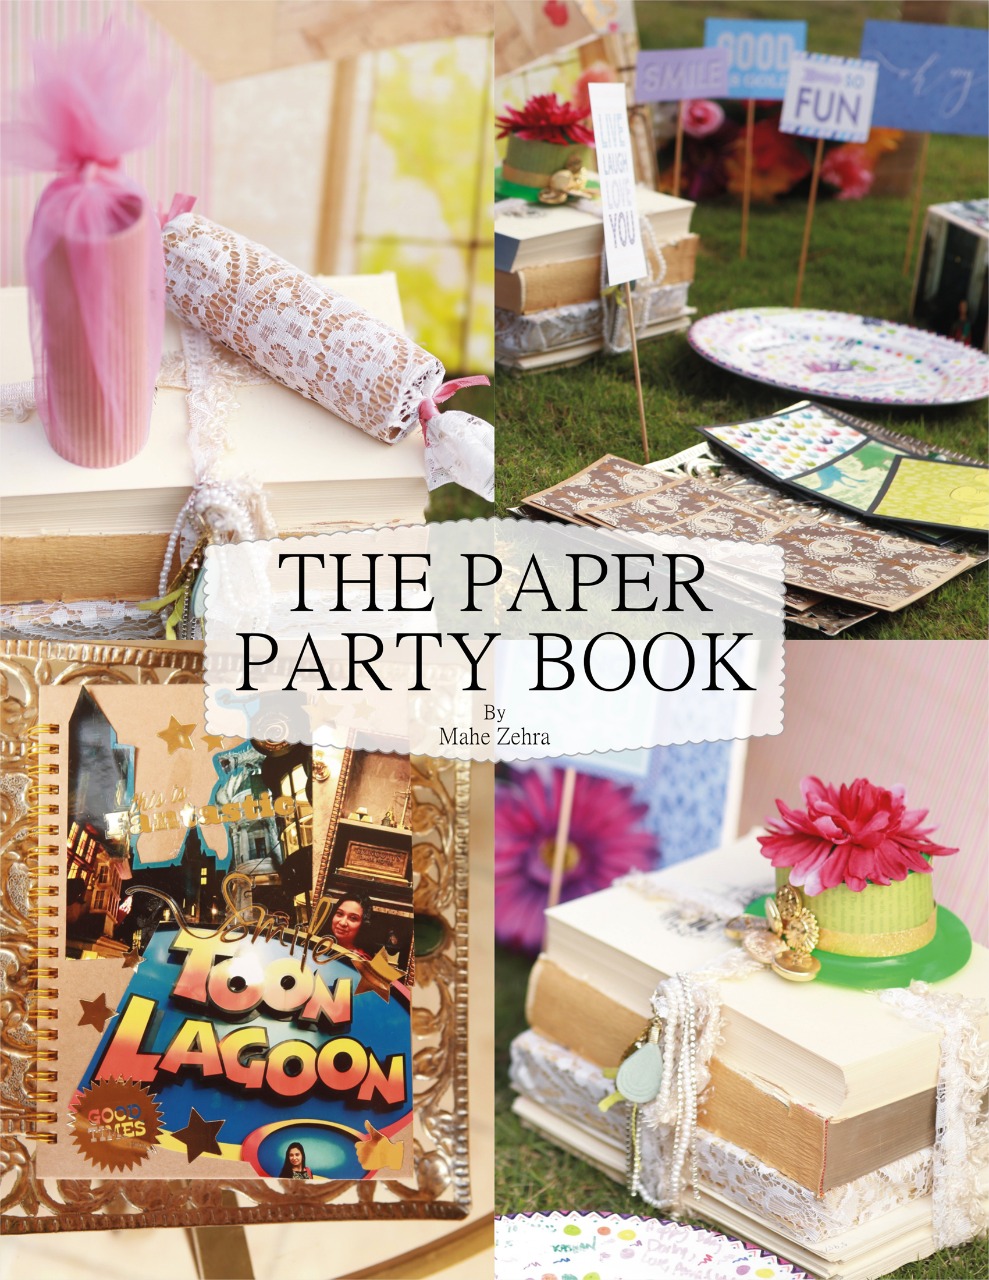 FREE: The Paper Party Book: DIY the Party of your Dreams! by Mahe Zehra